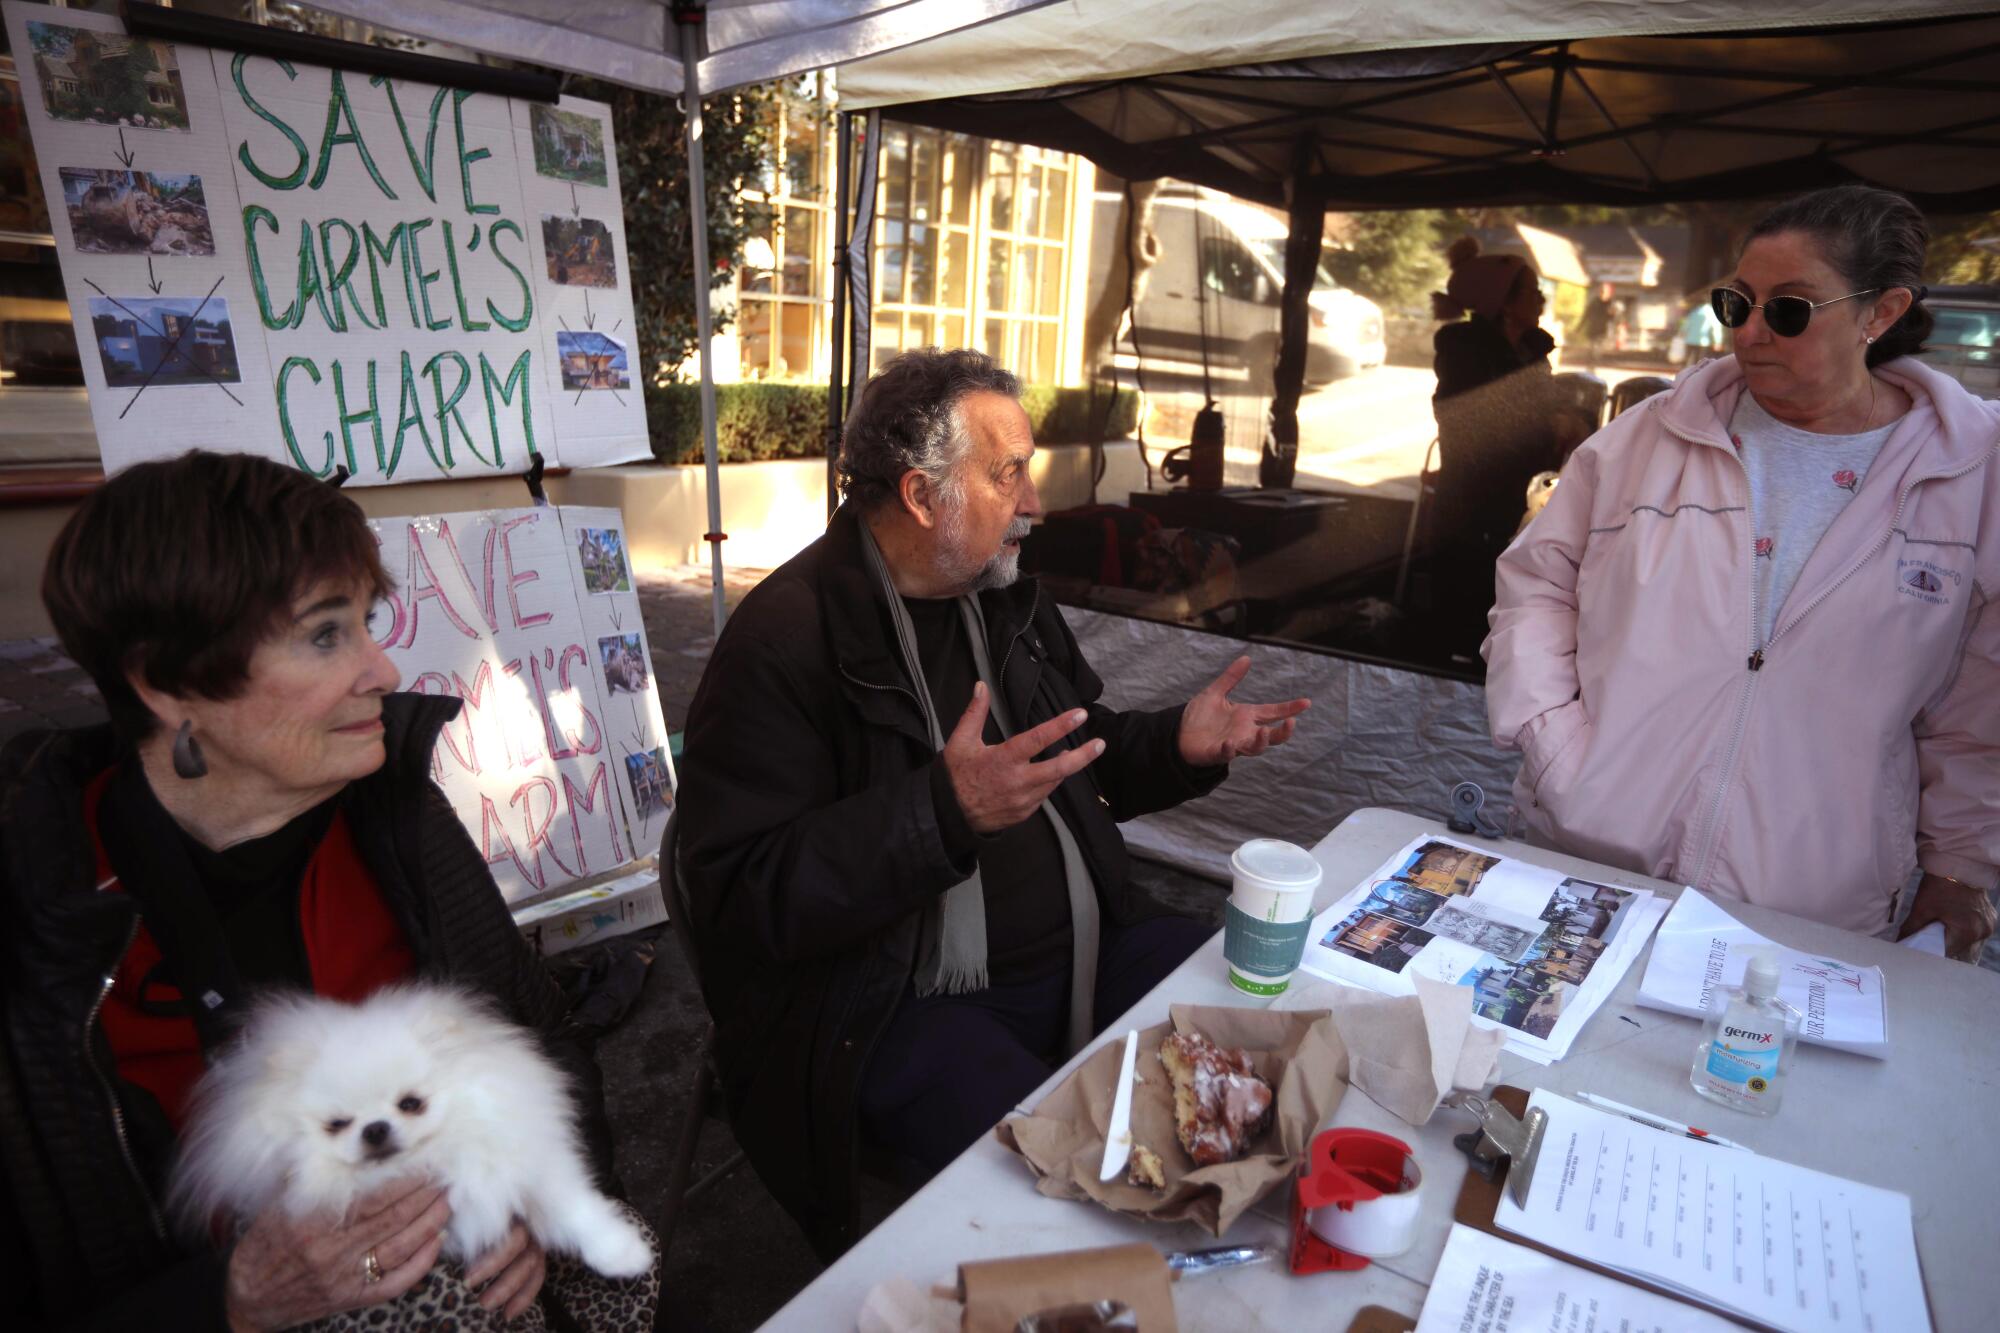 Three people talk during the weekly Farmers Market in Carmel-by-the-Sea.